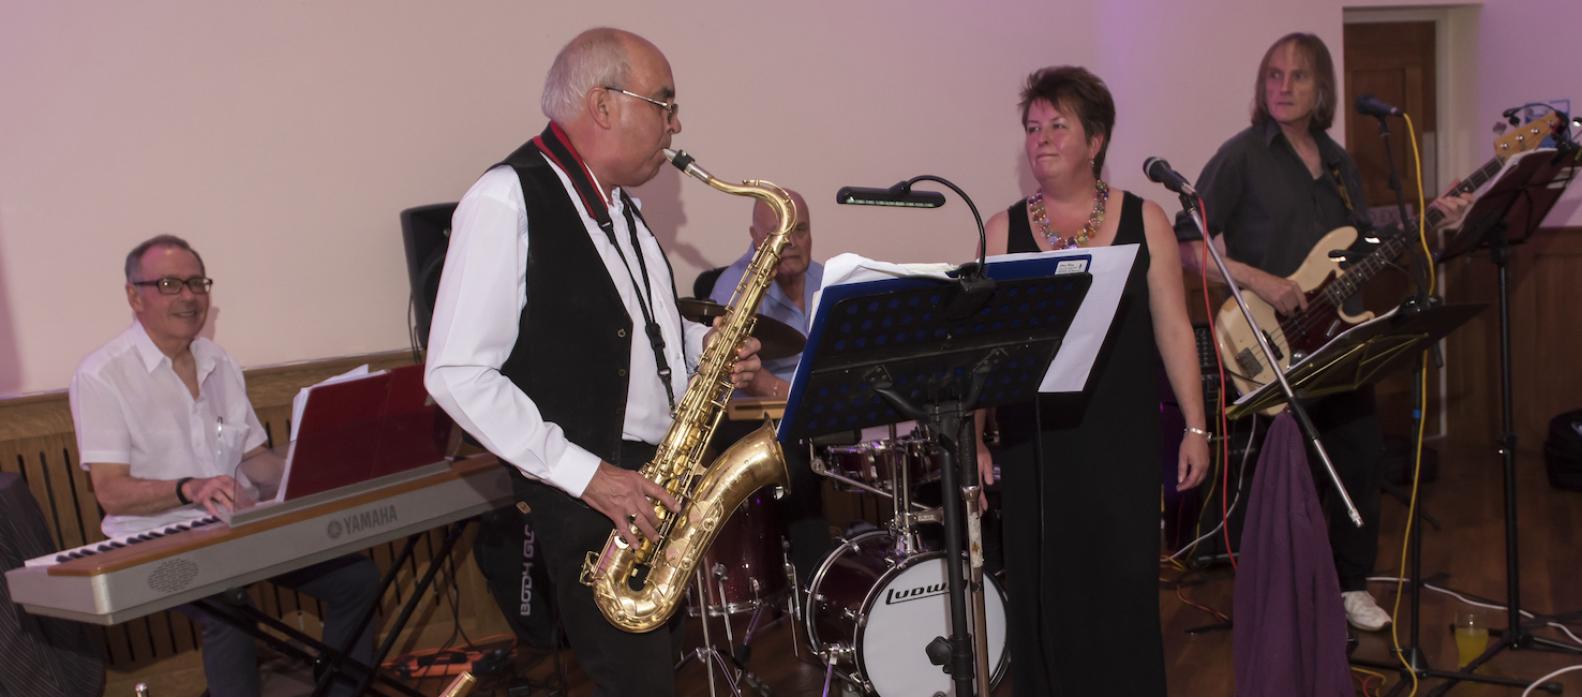 AFTERNOON DELIGHT: Jazz in the Afternoon will perform a varied programme at The Witham in early October